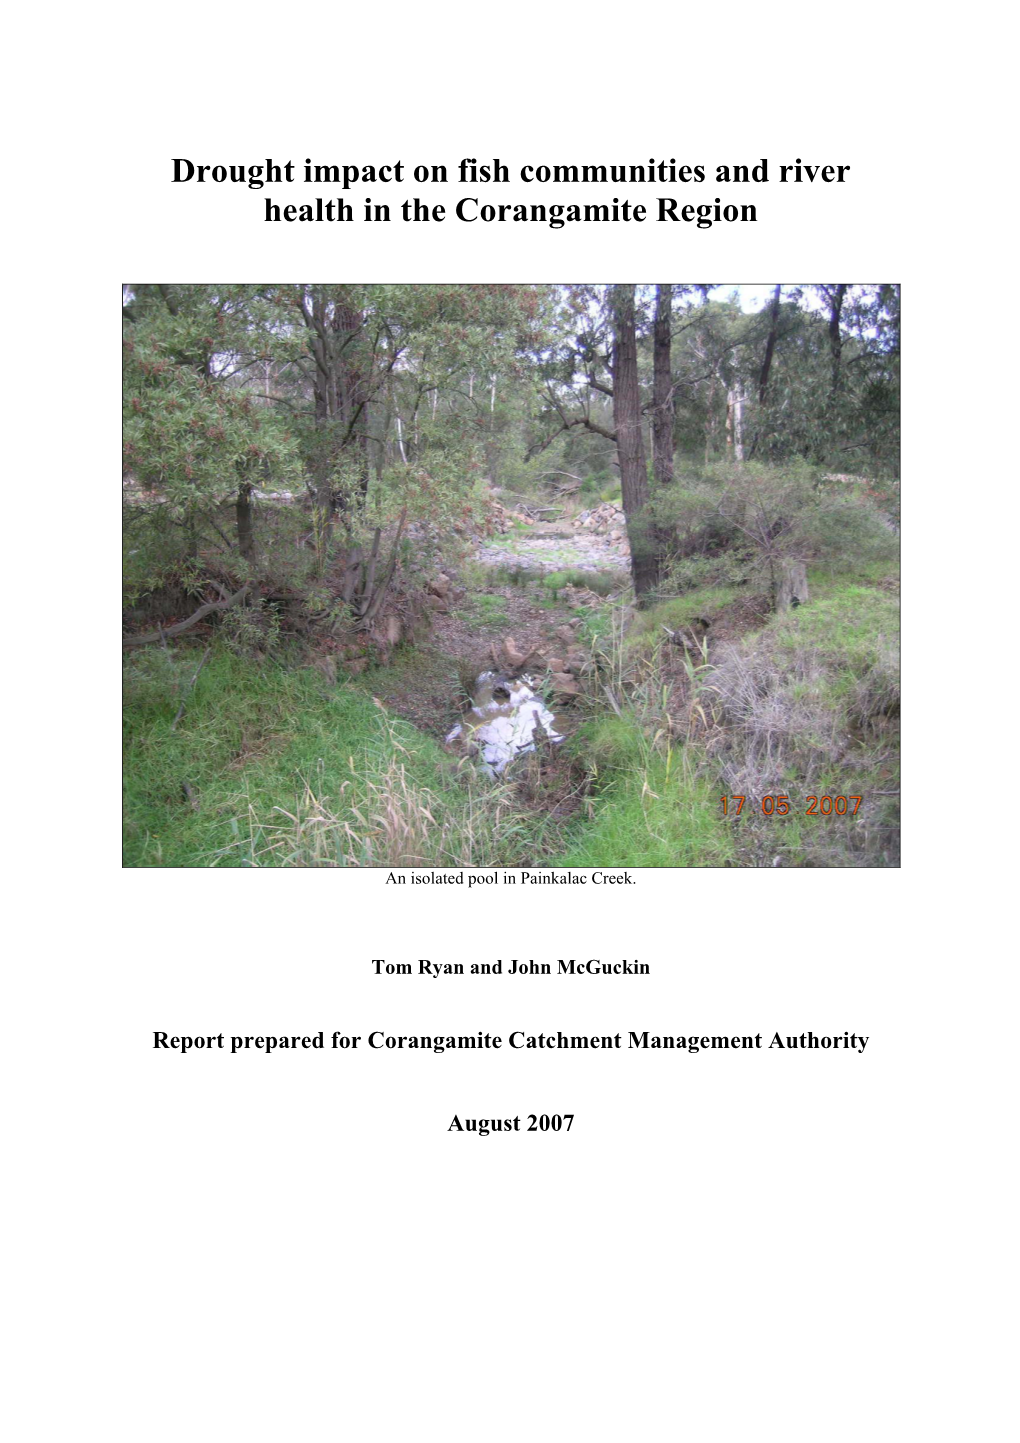 Drought Impact on Fish Communities and River Health in the Corangamite Region